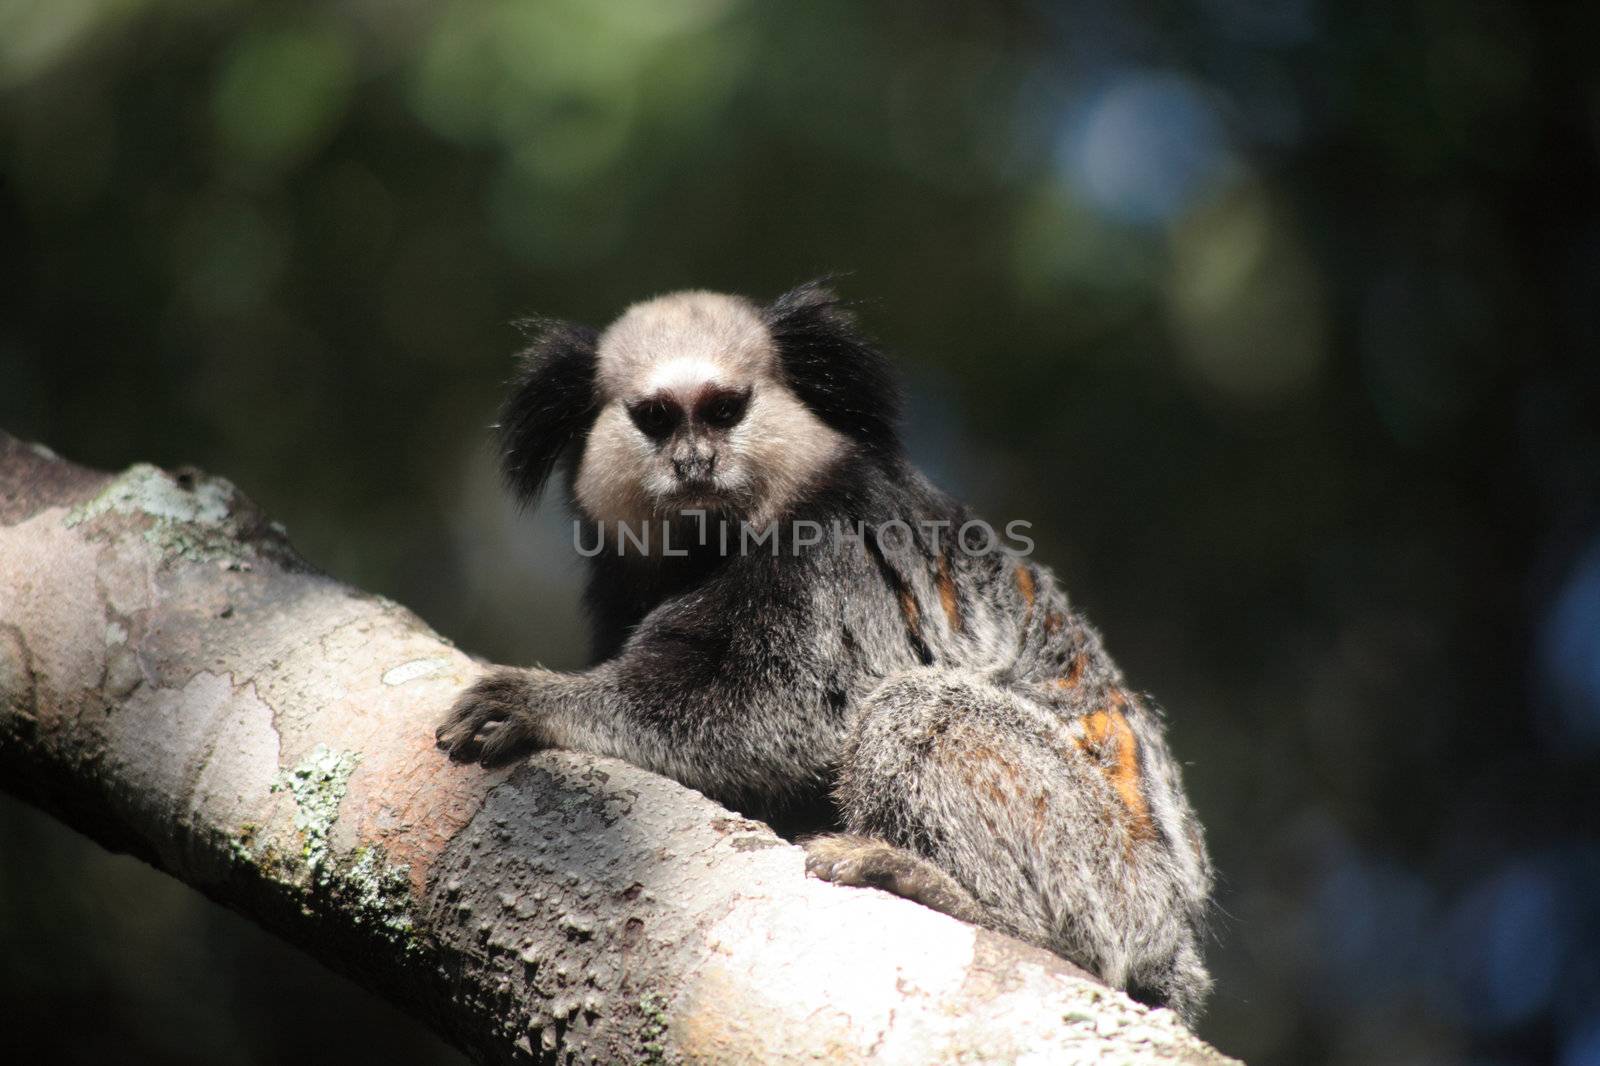 A 3 image set of the New World Monkeys, Tamarins, photographed in their natural habitat (Brazil).